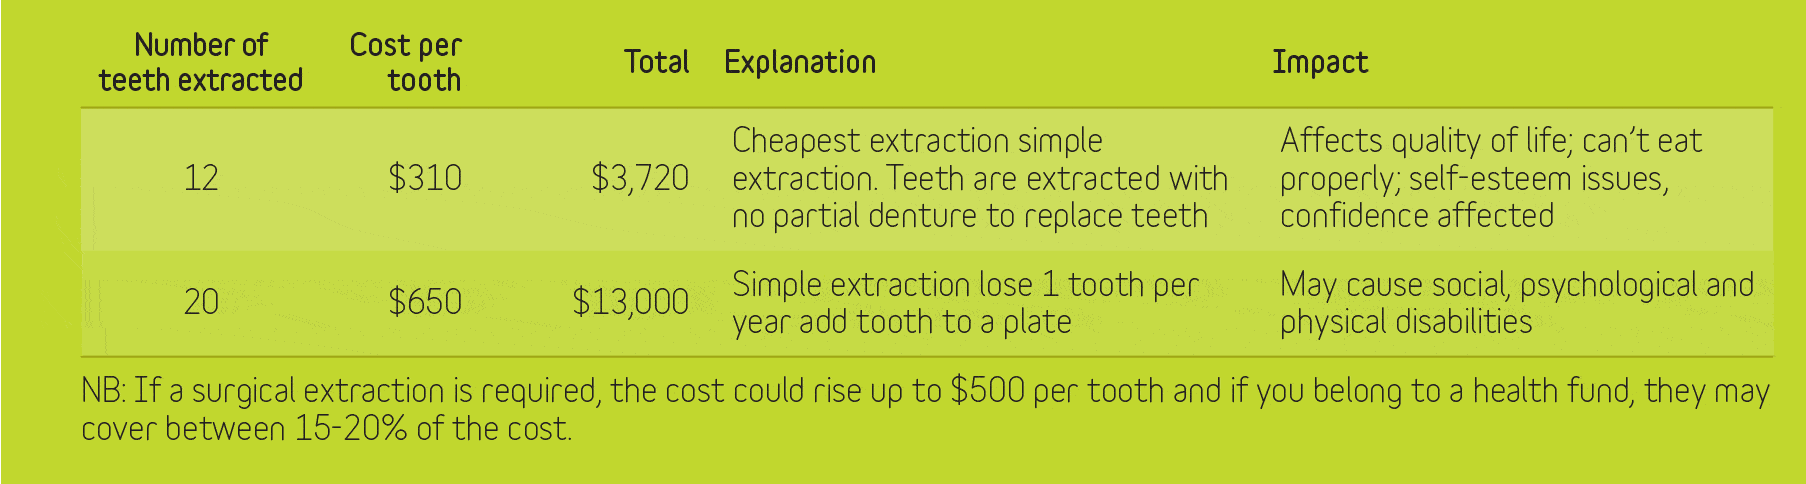 Table with costs of teeth extraction per year